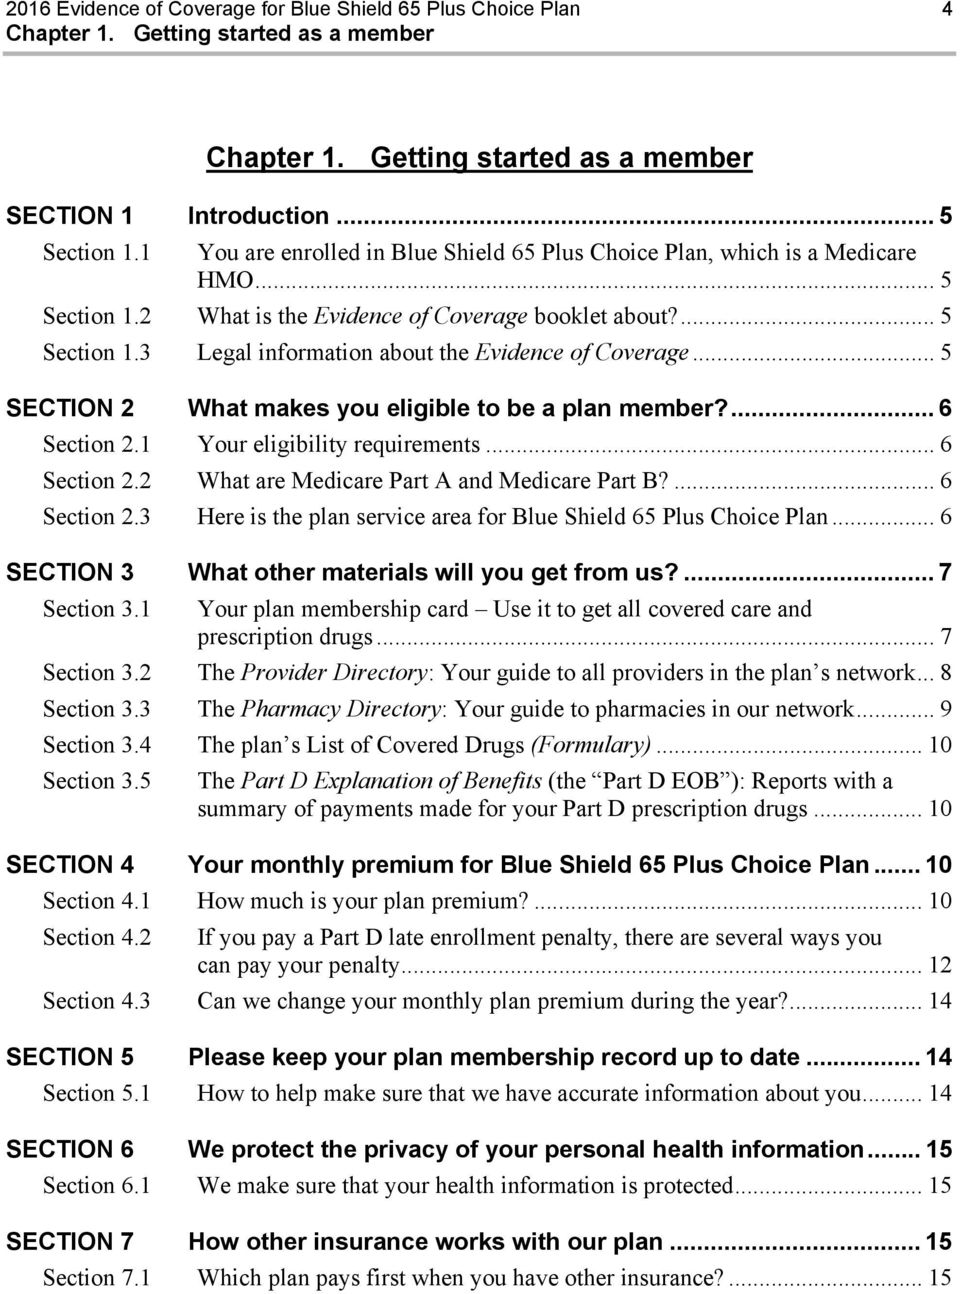 .. 5 SECTION 2 What makes you eligible to be a plan member?... 6 Section 2.1 Your eligibility requirements... 6 Section 2.2 What are Medicare Part A and Medicare Part B?... 6 Section 2.3 Here is the plan service area for Blue Shield 65 Plus Choice Plan.